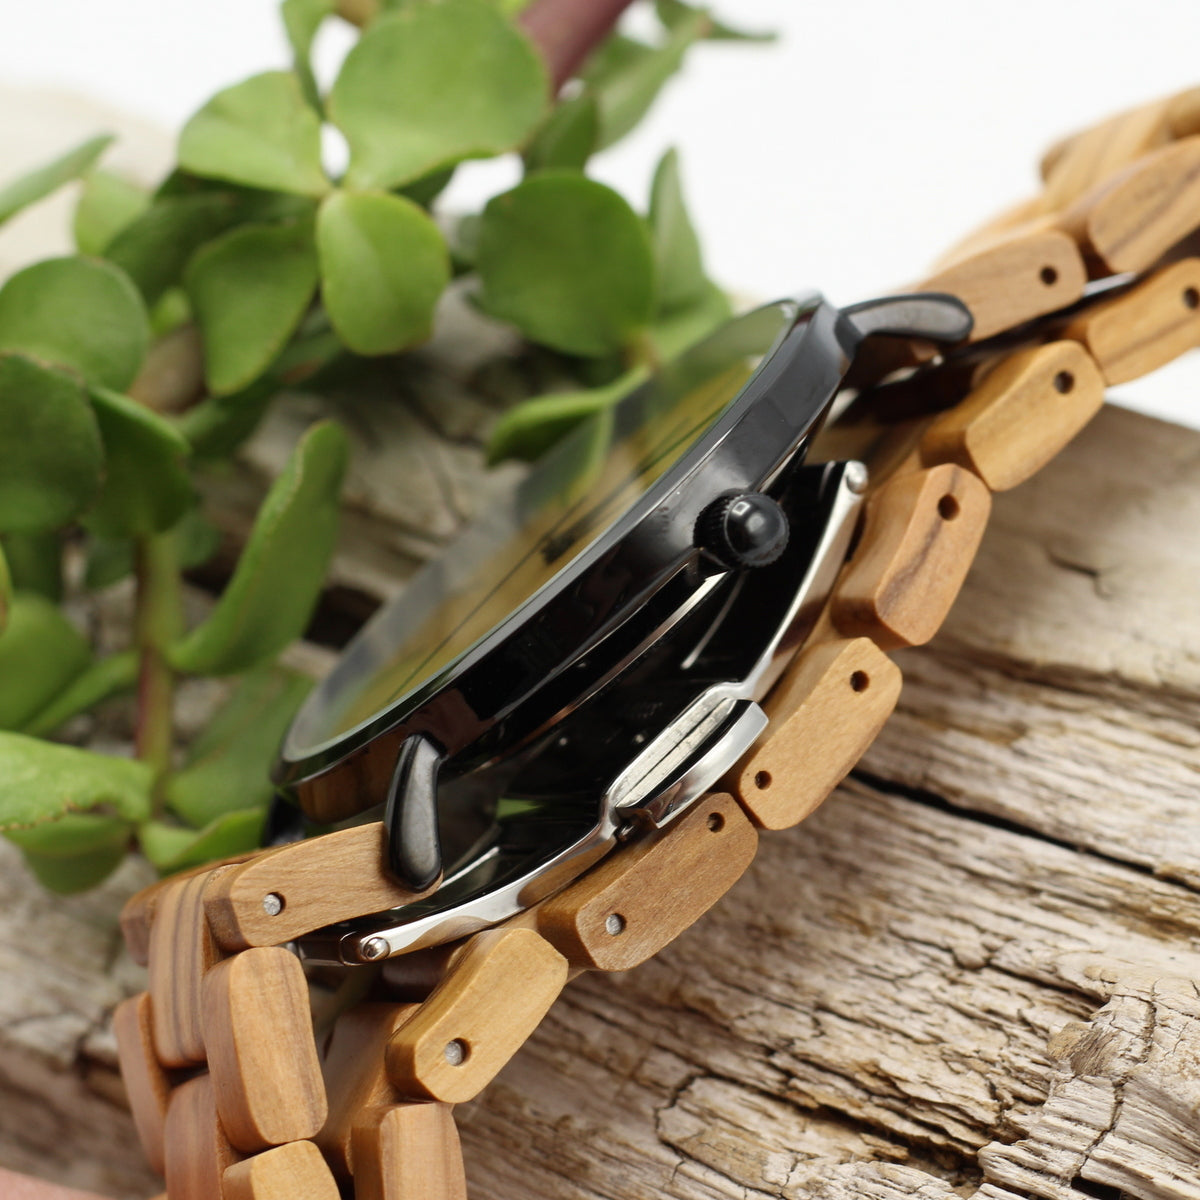 Men's stainless steel watch with walnut wood face and solid wood strap. The Emporio, a modern watch with an eco-friendly feel. Lightweight, ultraslim and uber-trendy. Personalise the back for only R80. Shipping anywhere in SA for R59.